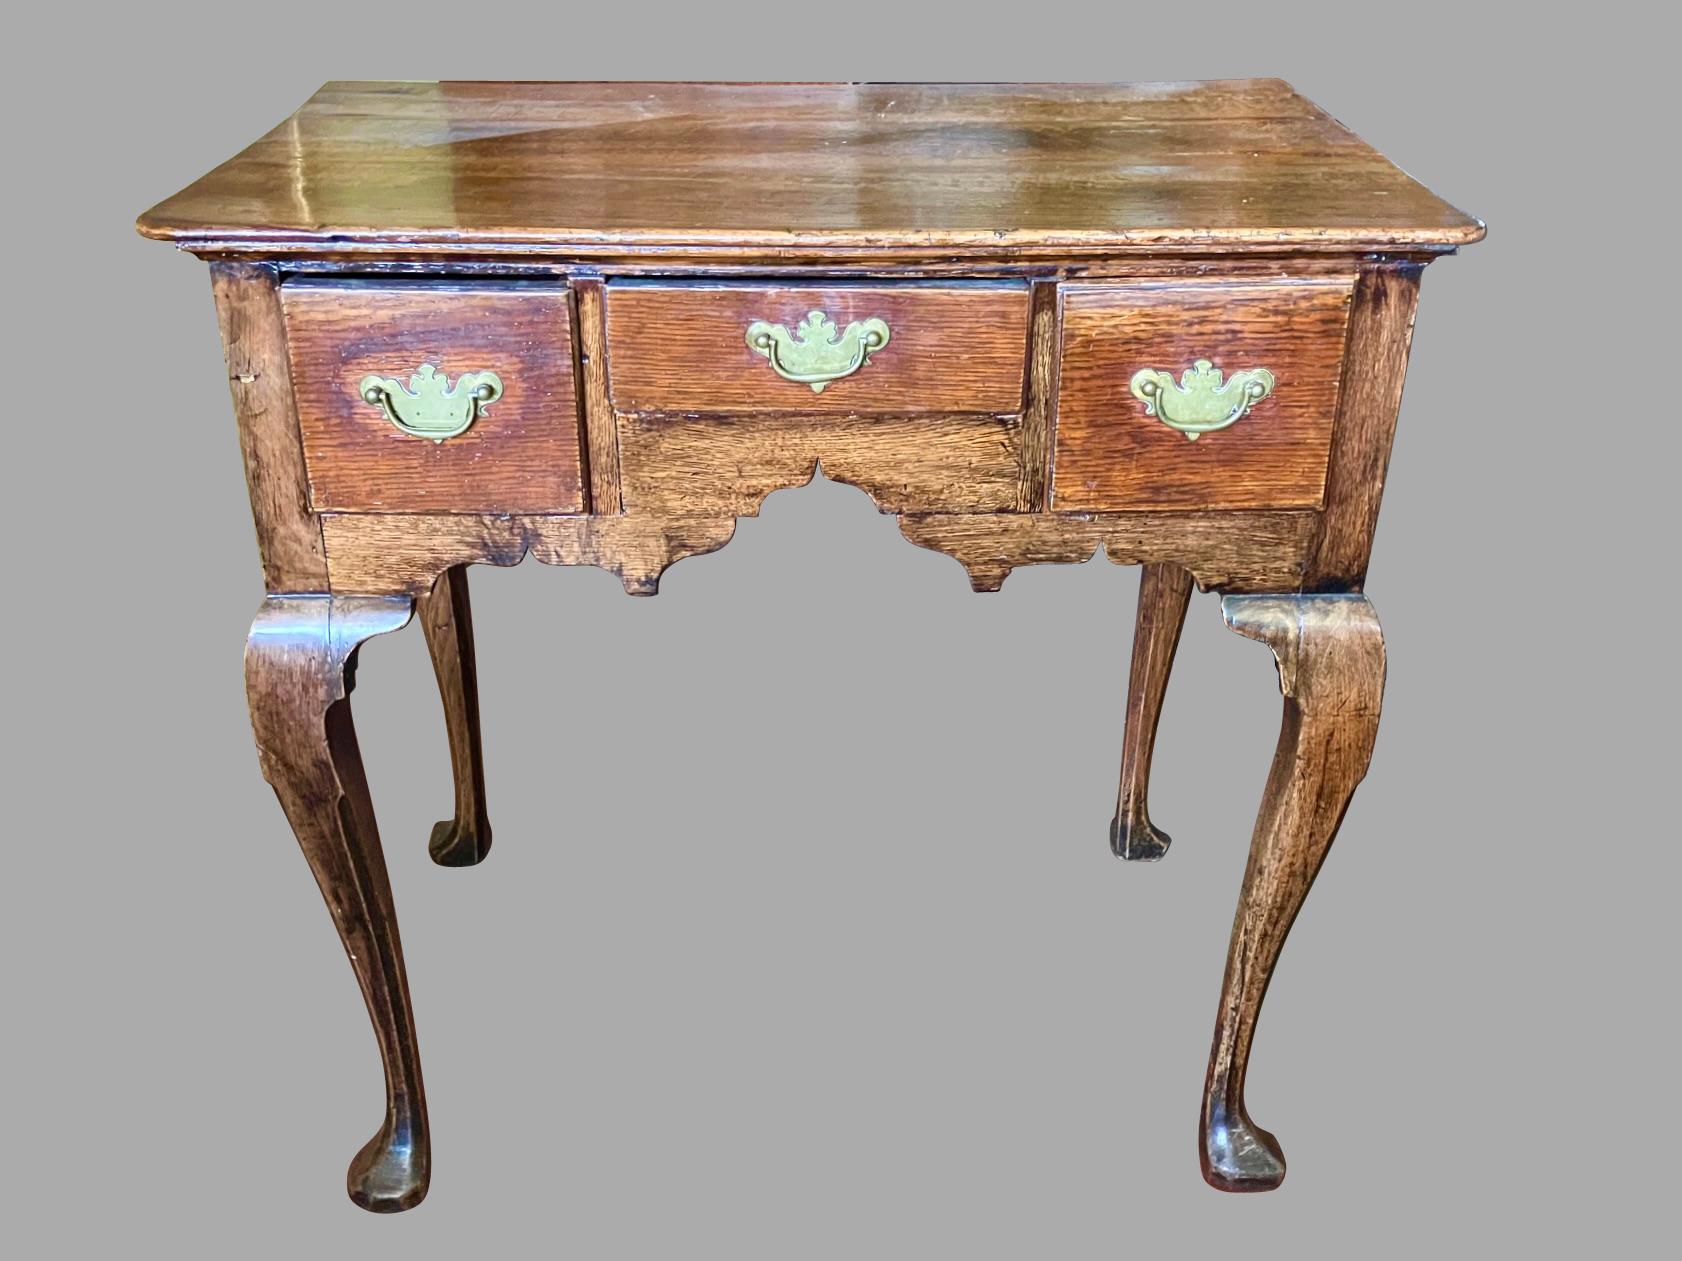 An English George II period provincial oak lowboy or dressing table of typical form, the overhanging top with a molded edge above 3 fitted drawers over a shaped apron. The piece is supported on cabriole legs ending in shaped pad feet. Appears to